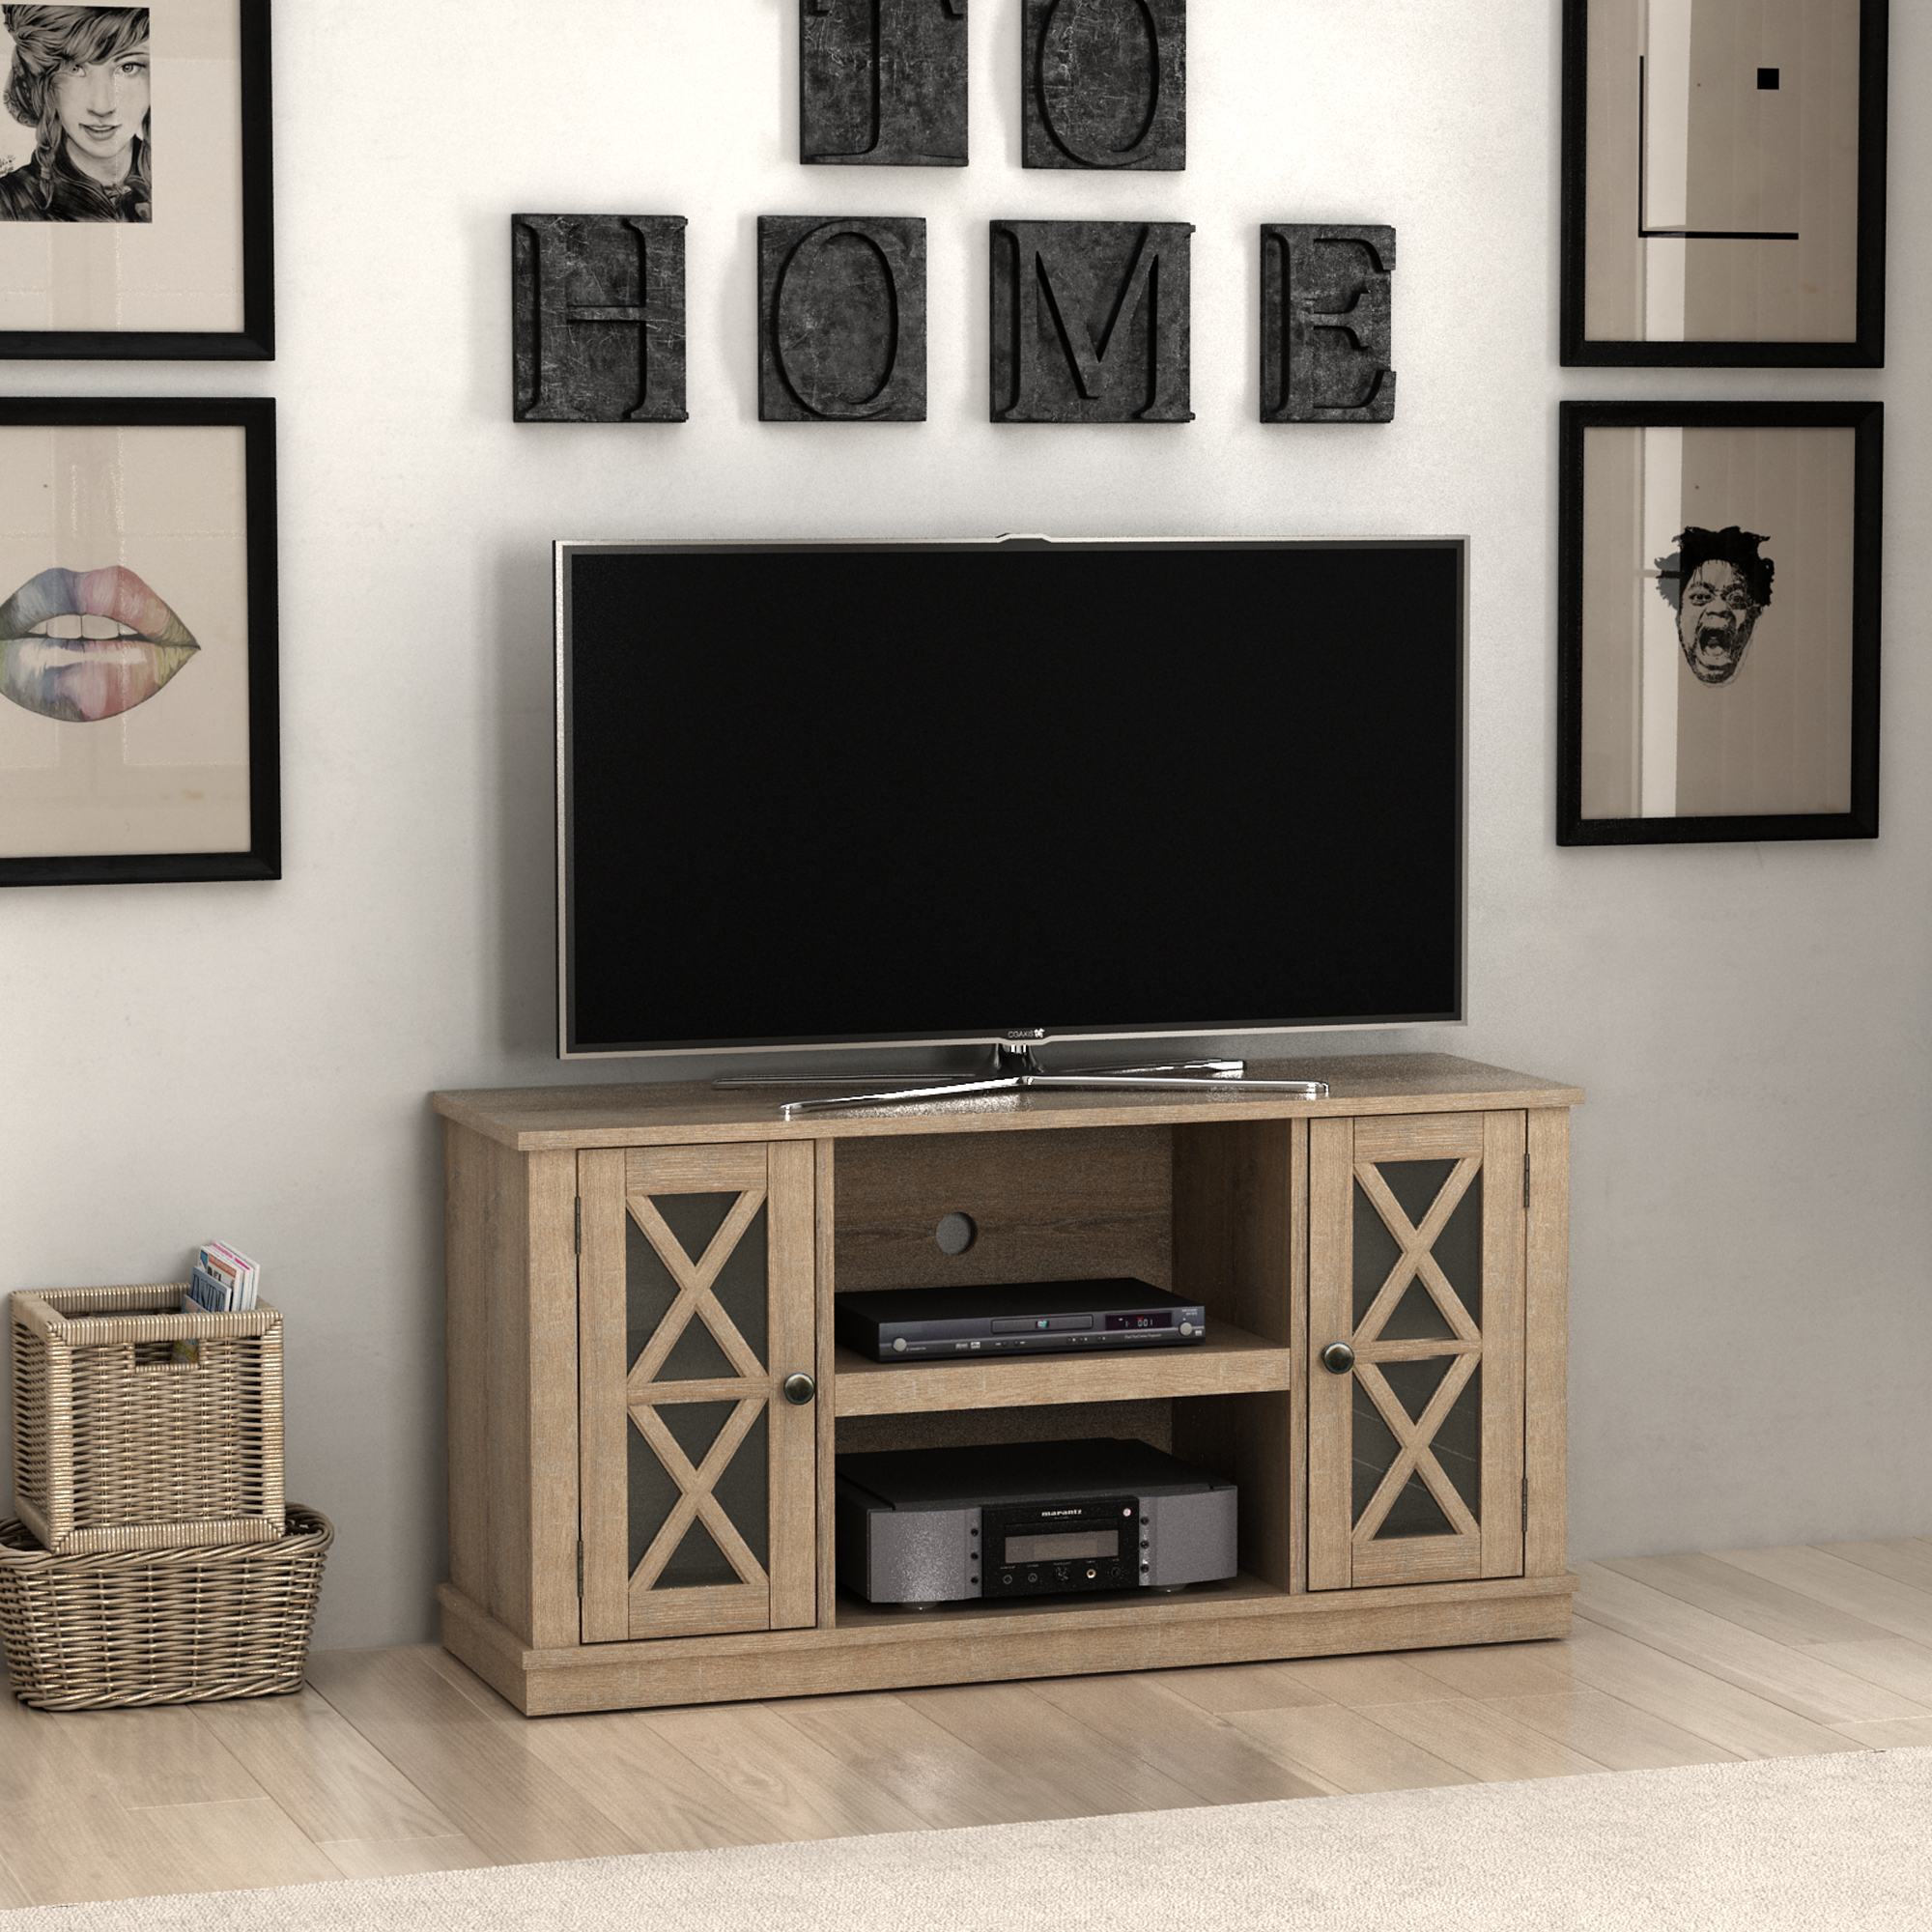 Twin Star Luxe Stanton Ridge TV Stand for TVs up to 55", Oak - image 1 of 8